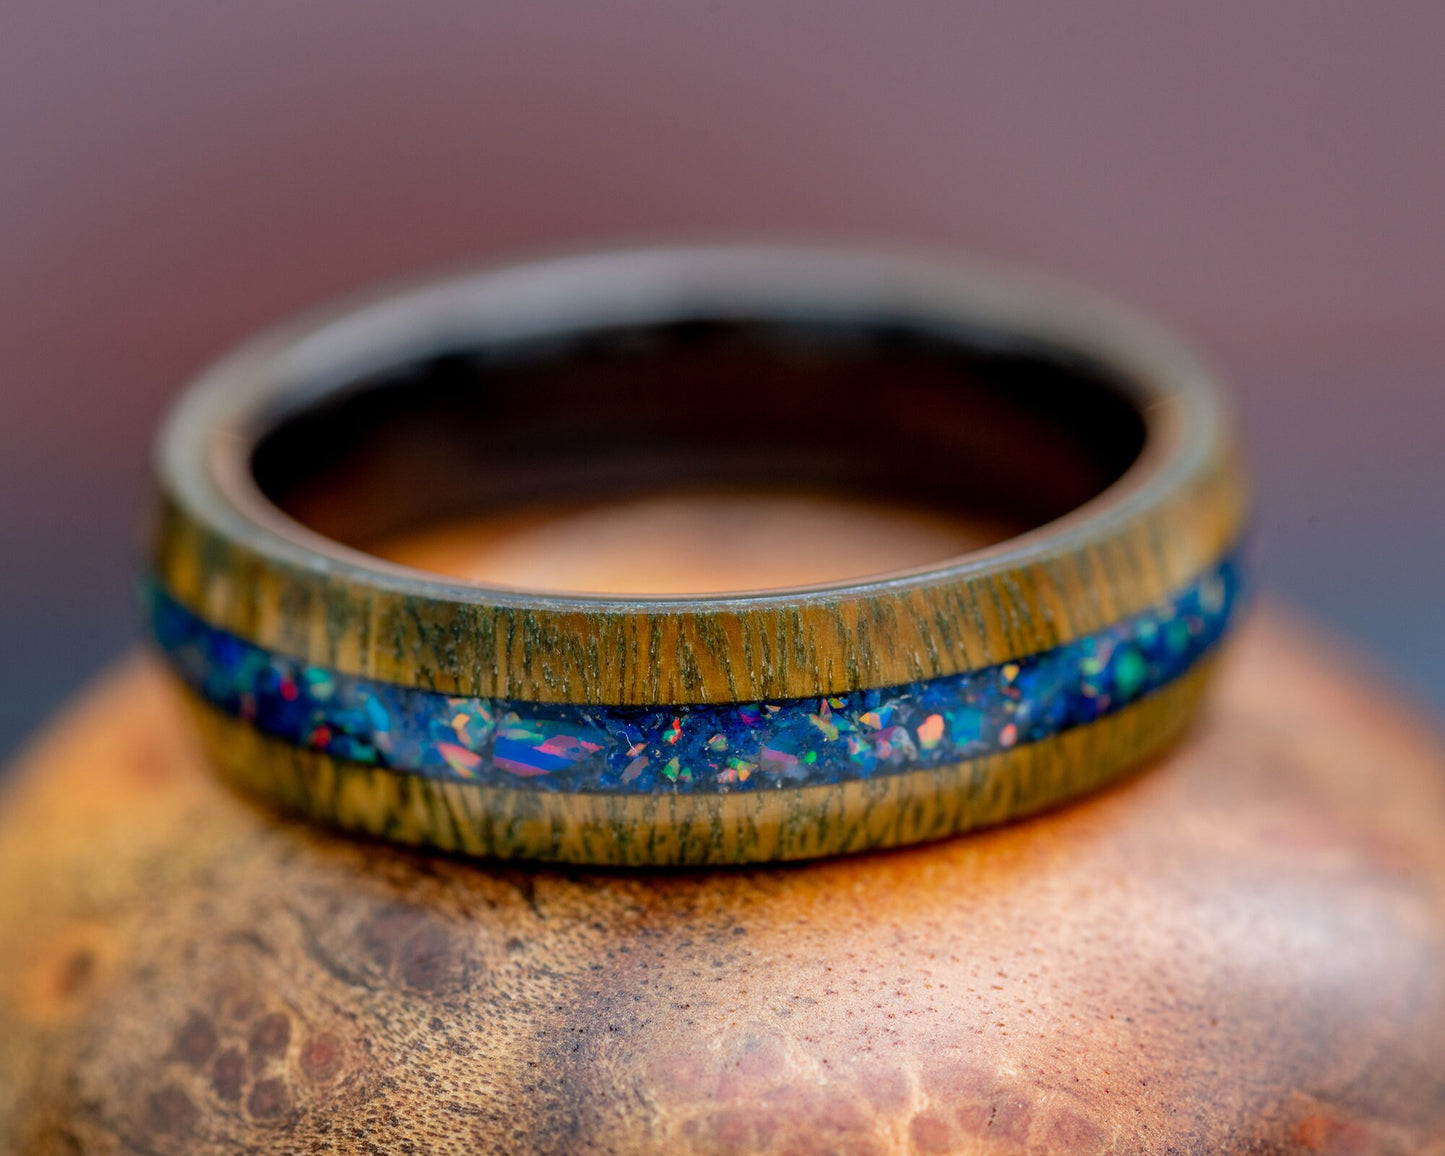 Handmade Wood & Opal Ring | Lignum Vitae Wood with Opal and Lapis Lazuli Inlay on 8mm Wide Black Ceramic Core | Handcrafted Size 11 Ring